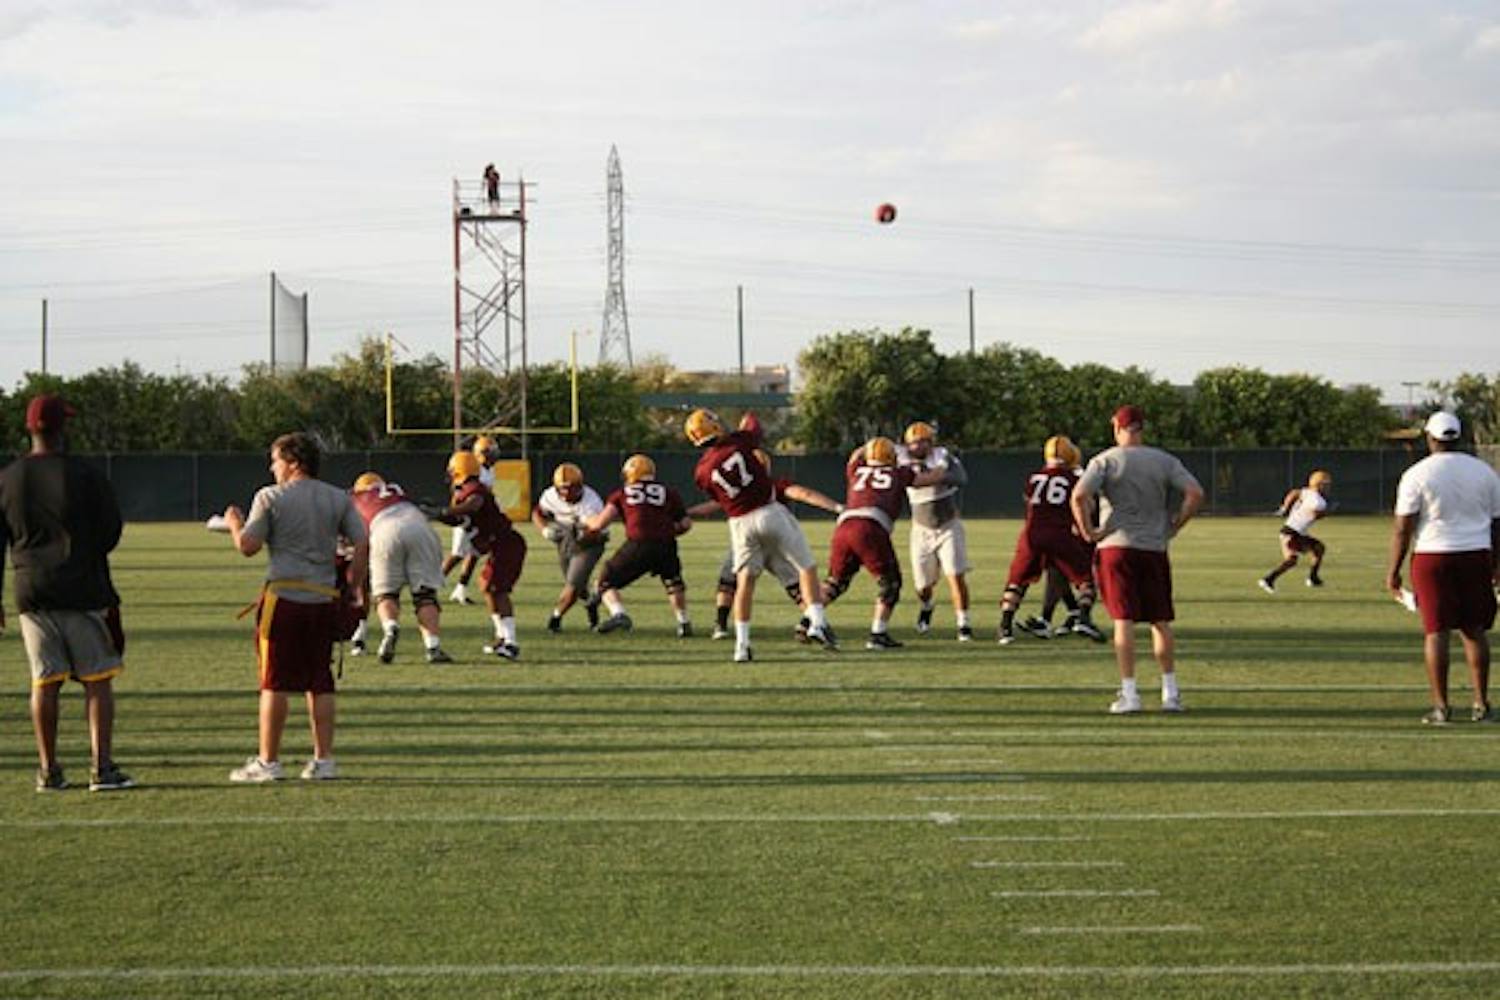 AIR IT OUT: ASU sophomore quarterback Brock Osweiler throws a pass during the Sun Devils’ spring practice on Wednesday. Osweiler will battle junior Steven Threet for the starting job in 2010. (Photo by Kyle Thompson)